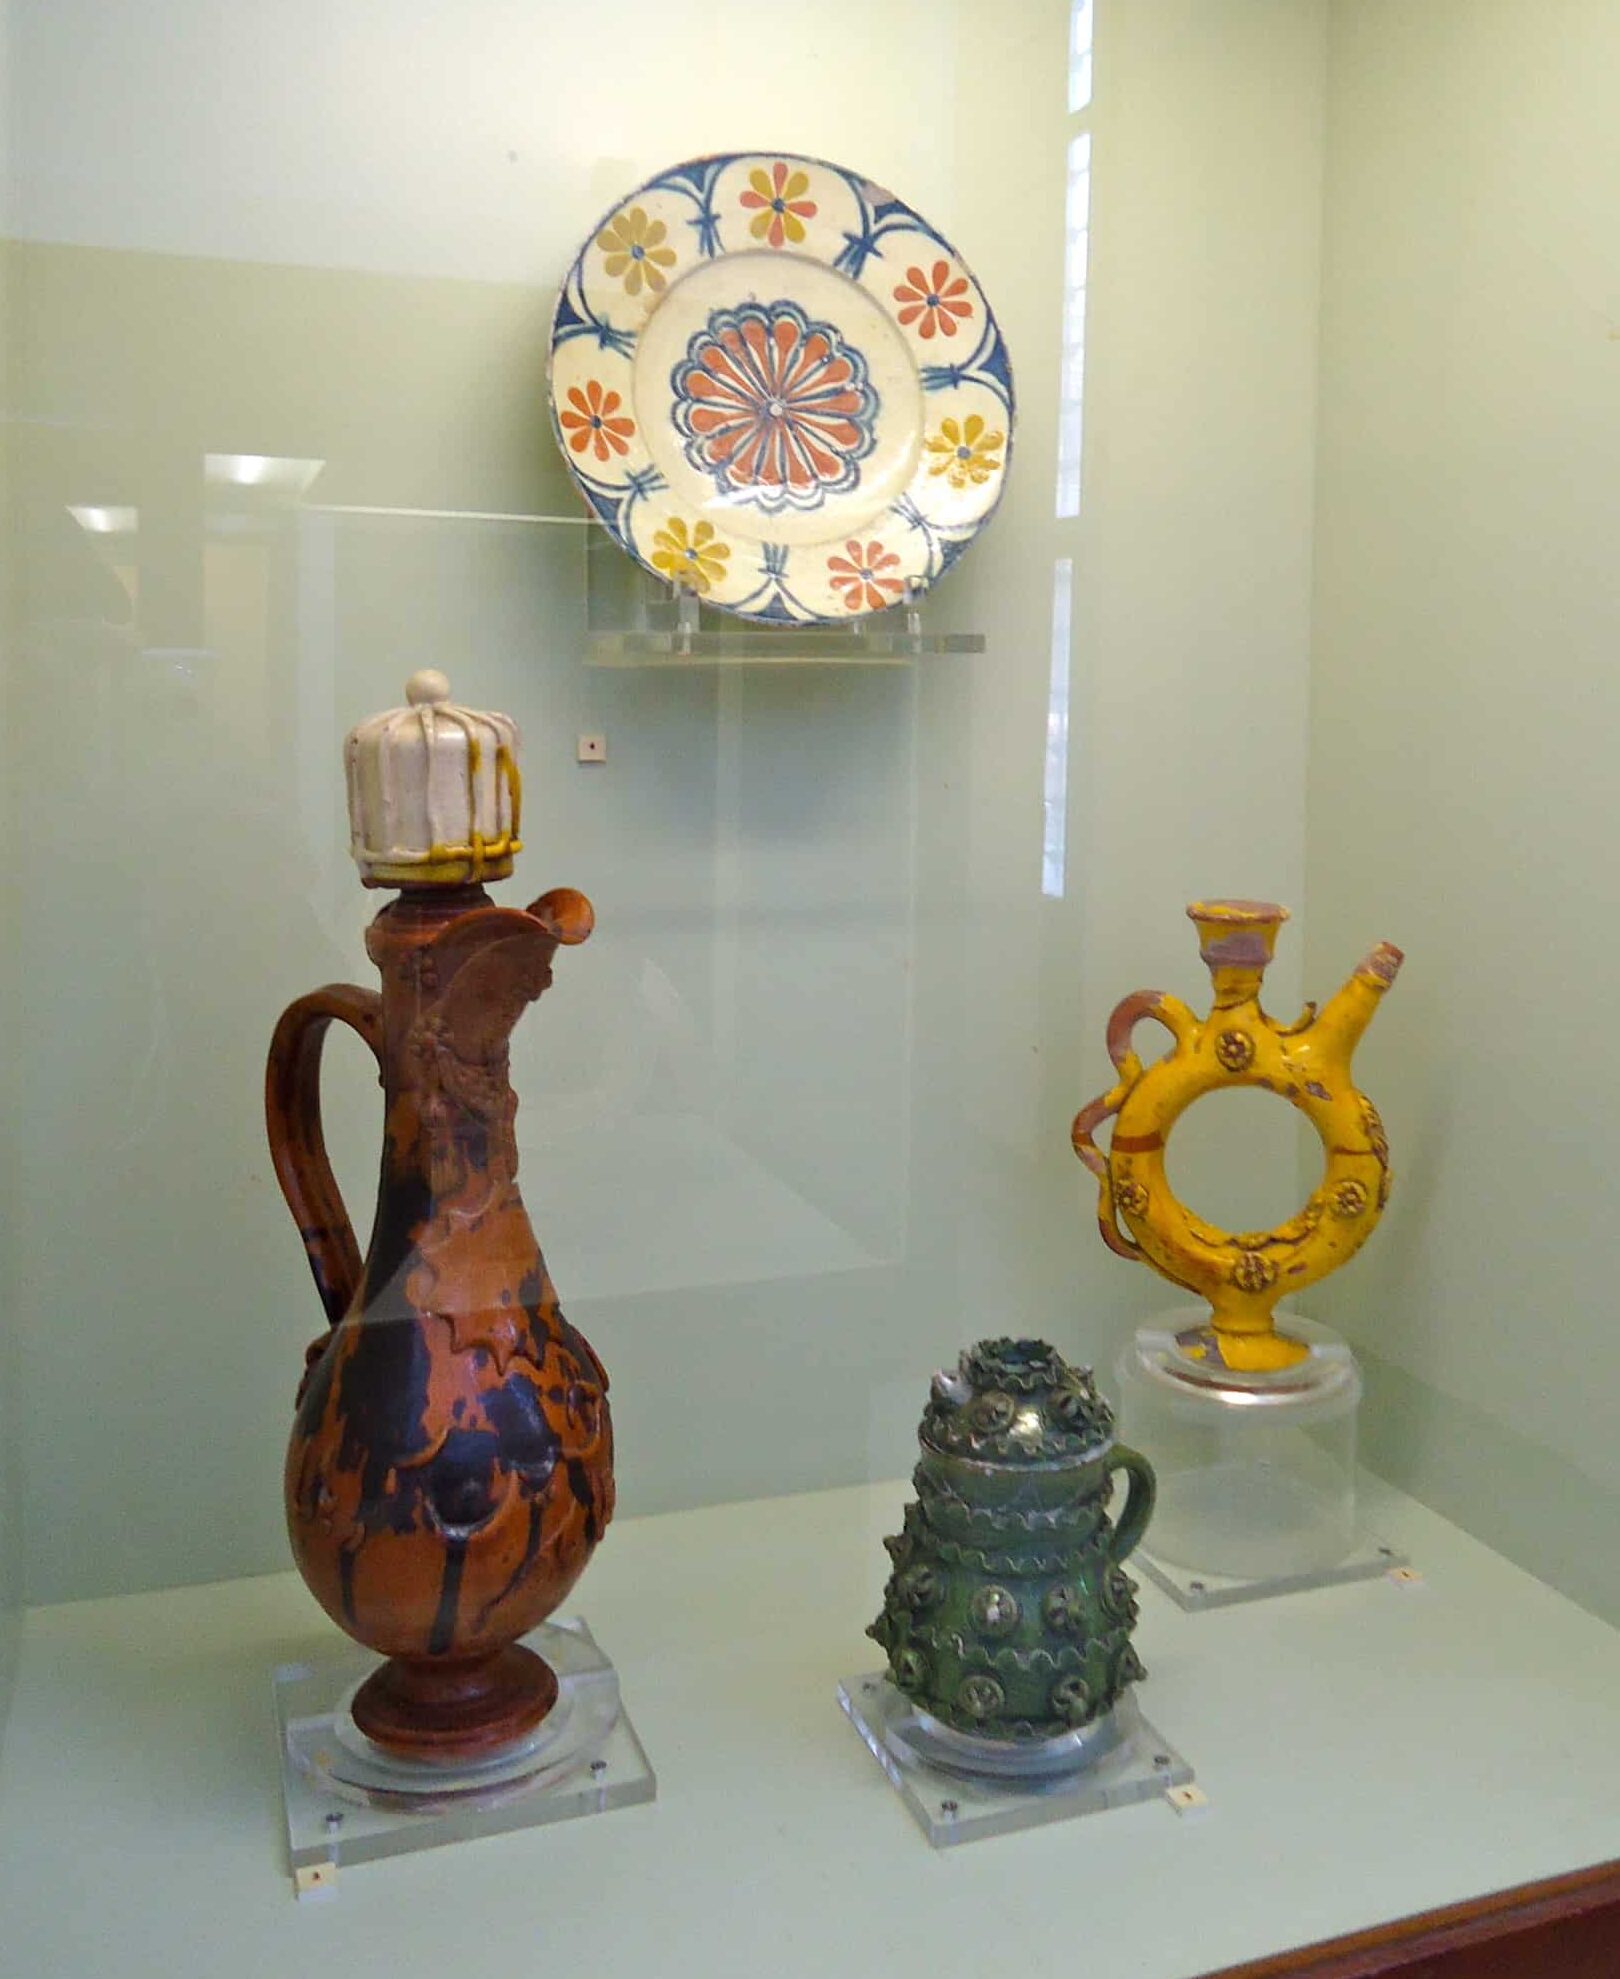 Ceramics at the Tiled Kiosk at the Istanbul Archaeology Museums in Istanbul, Turkey